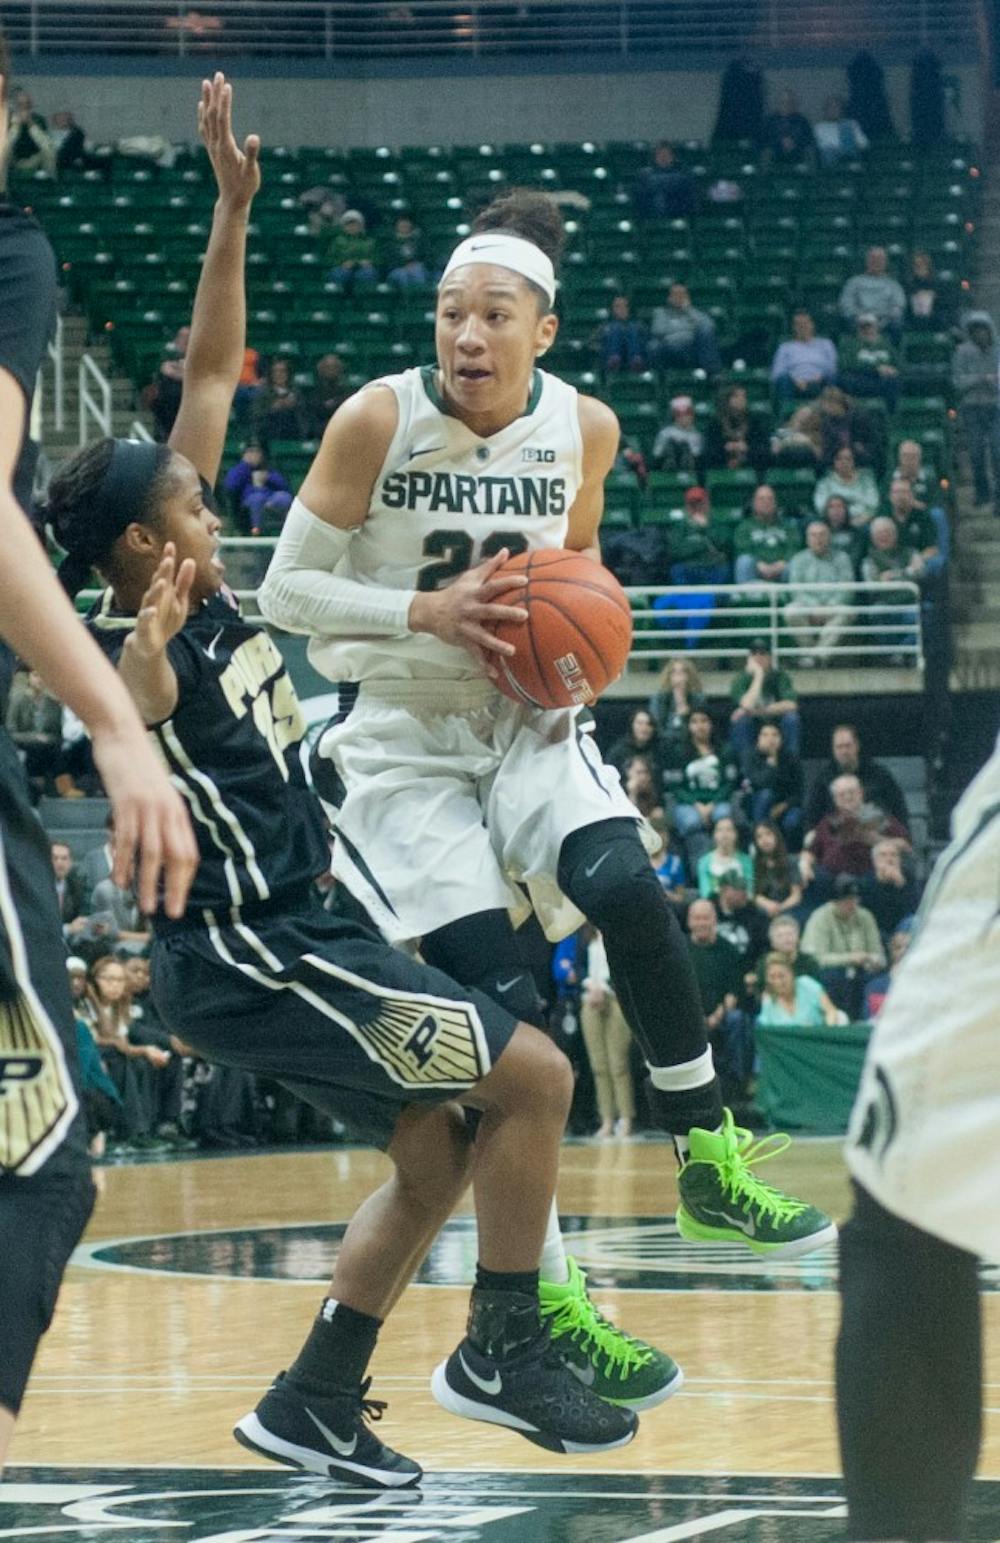 Junior forward Aerial Powers looks to shoot while Purdue guard April Wilson blocks during the first half of the game against Purdue on Jan. 27, 2016 at Breslin Center. The Spartans defeated the Boilermakers, 68-56.